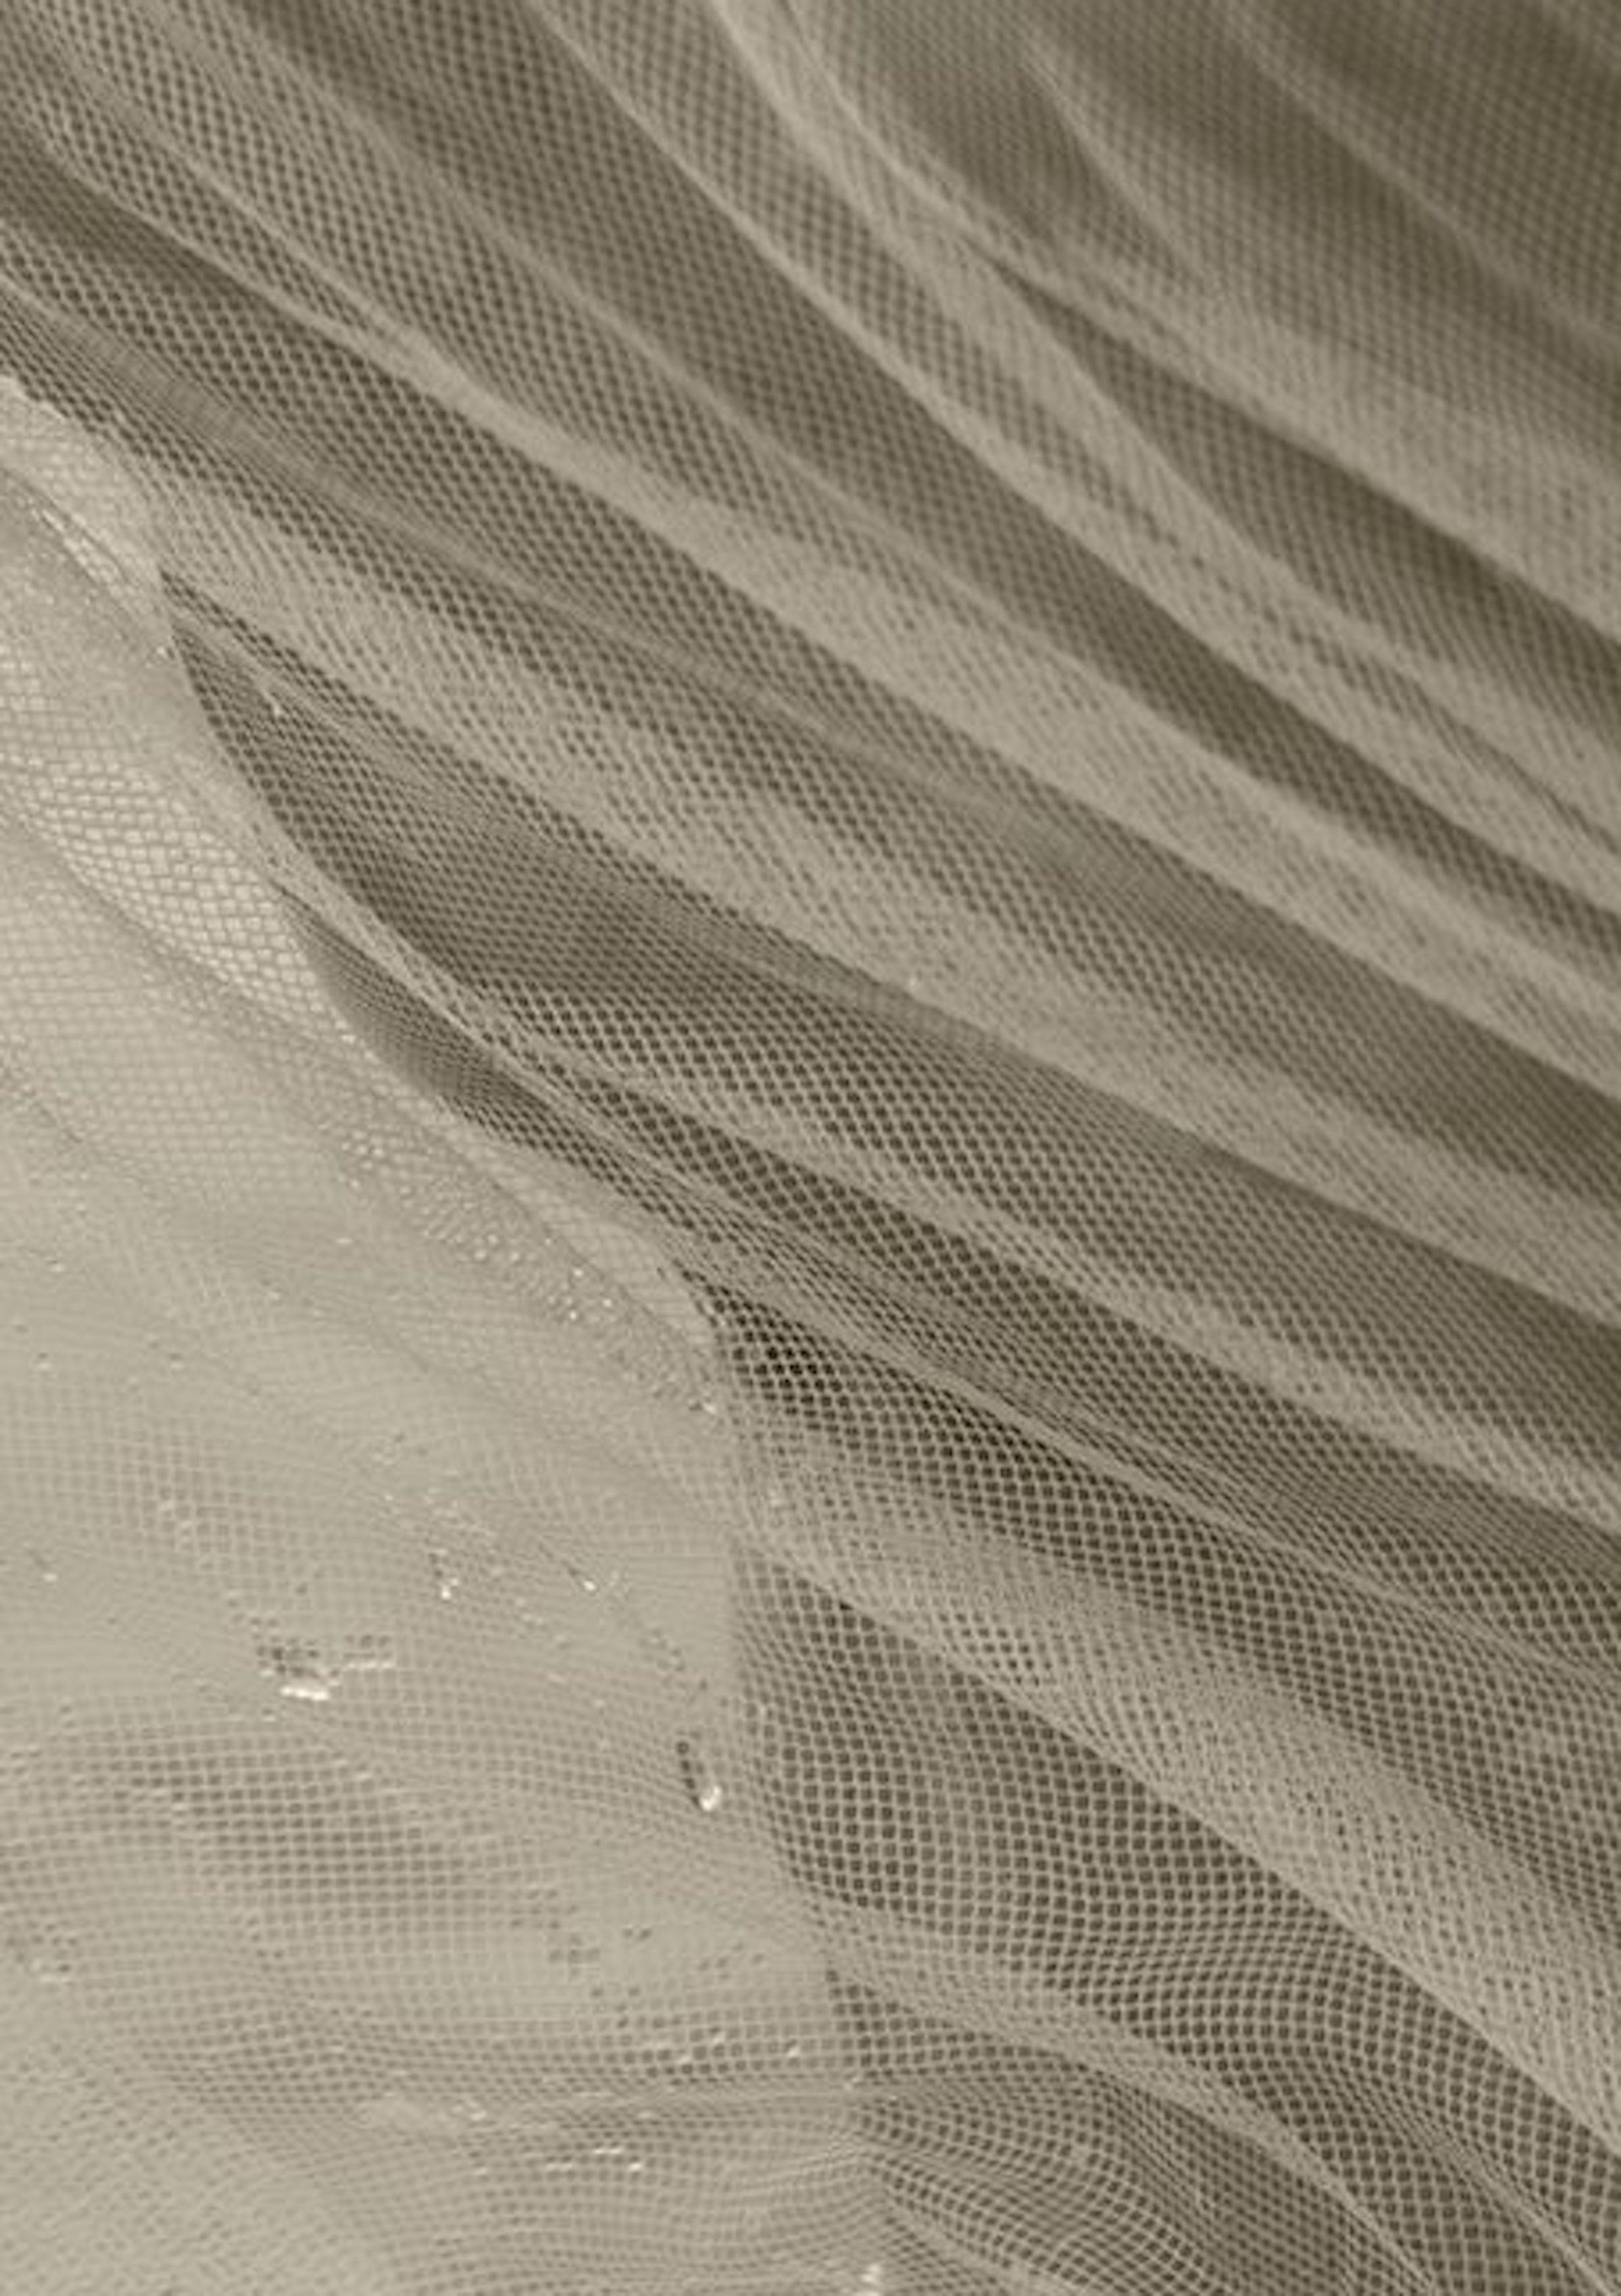 Sepia Photograph
Archival Pigment print
Medium Ed of 10 
For this series, he used elements such as water (emotions) to narrate a story. He worked with the color Blanco in the fabrics to communicate clarity and rebirth.  Cohete,  frequently plays